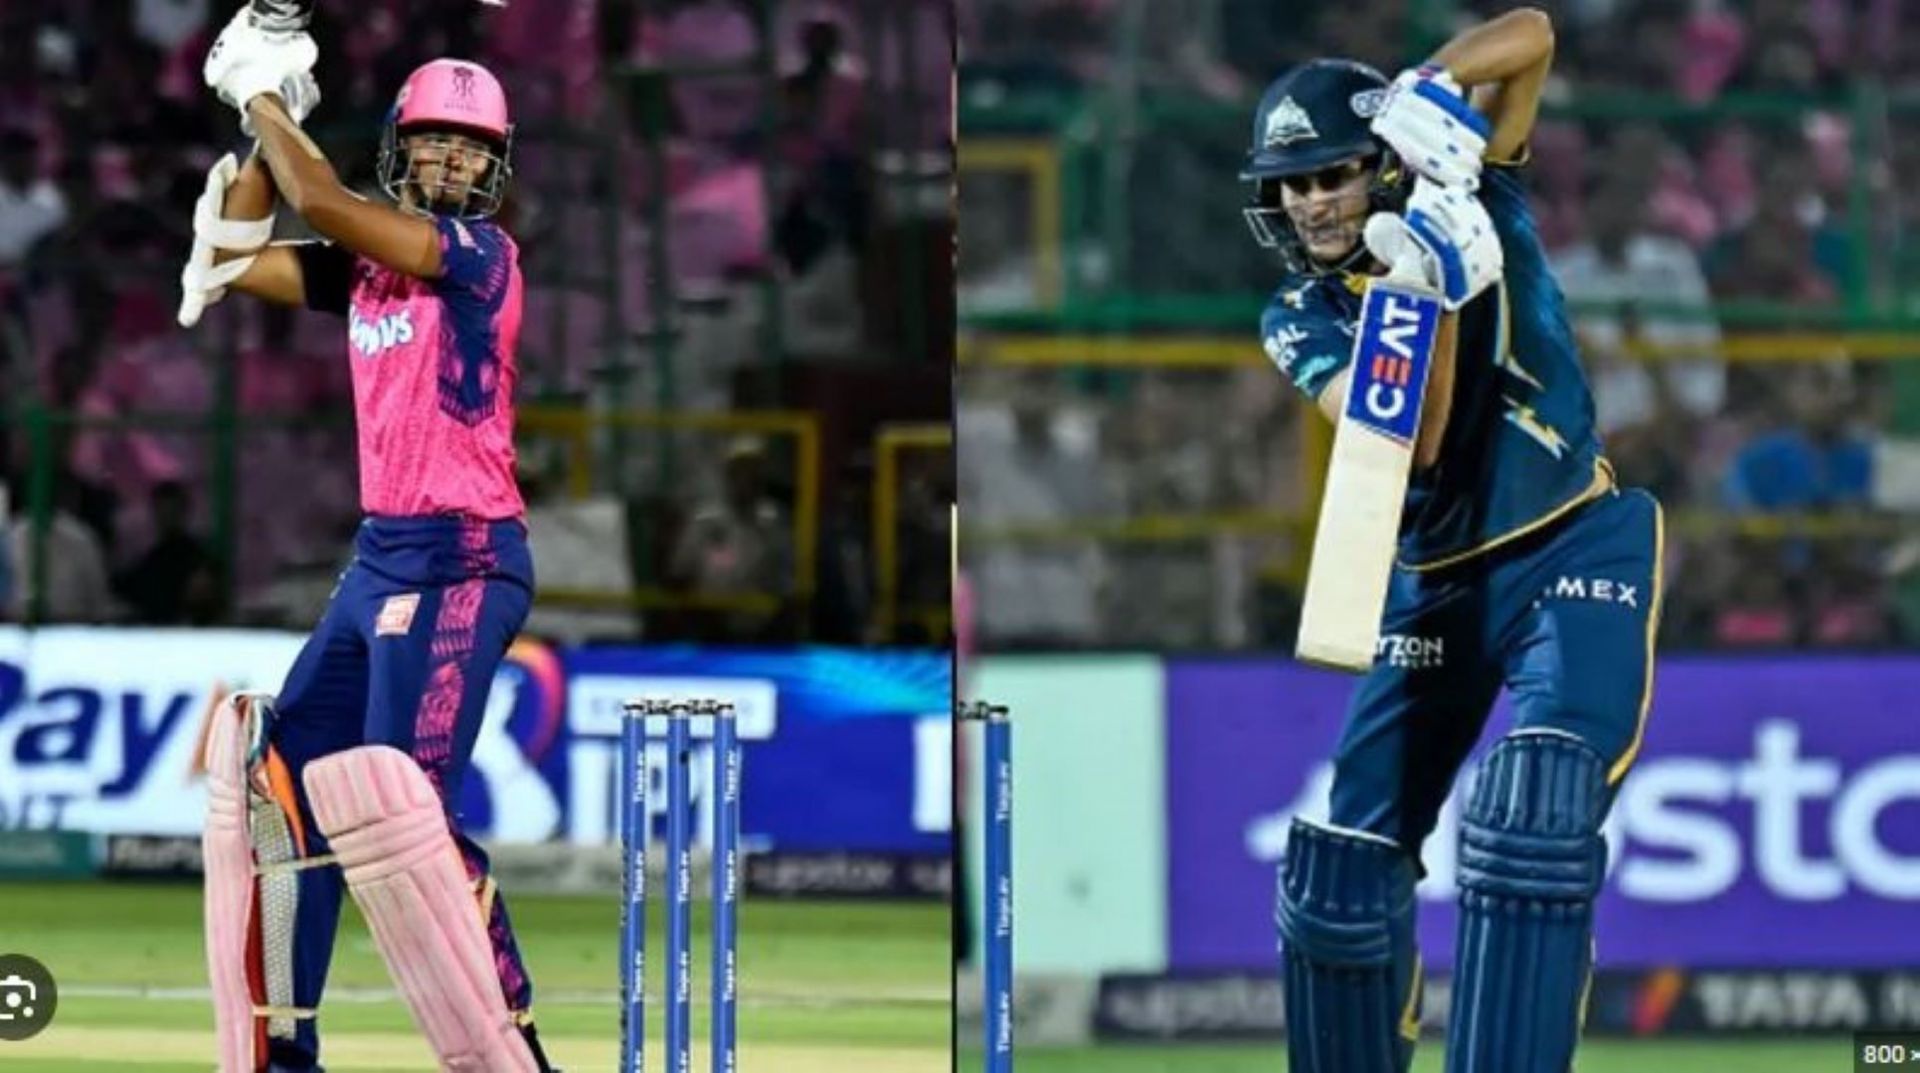 Yashasvi Jaiswal and Shubman Gill have been the best young batters in the ongoing IPL.